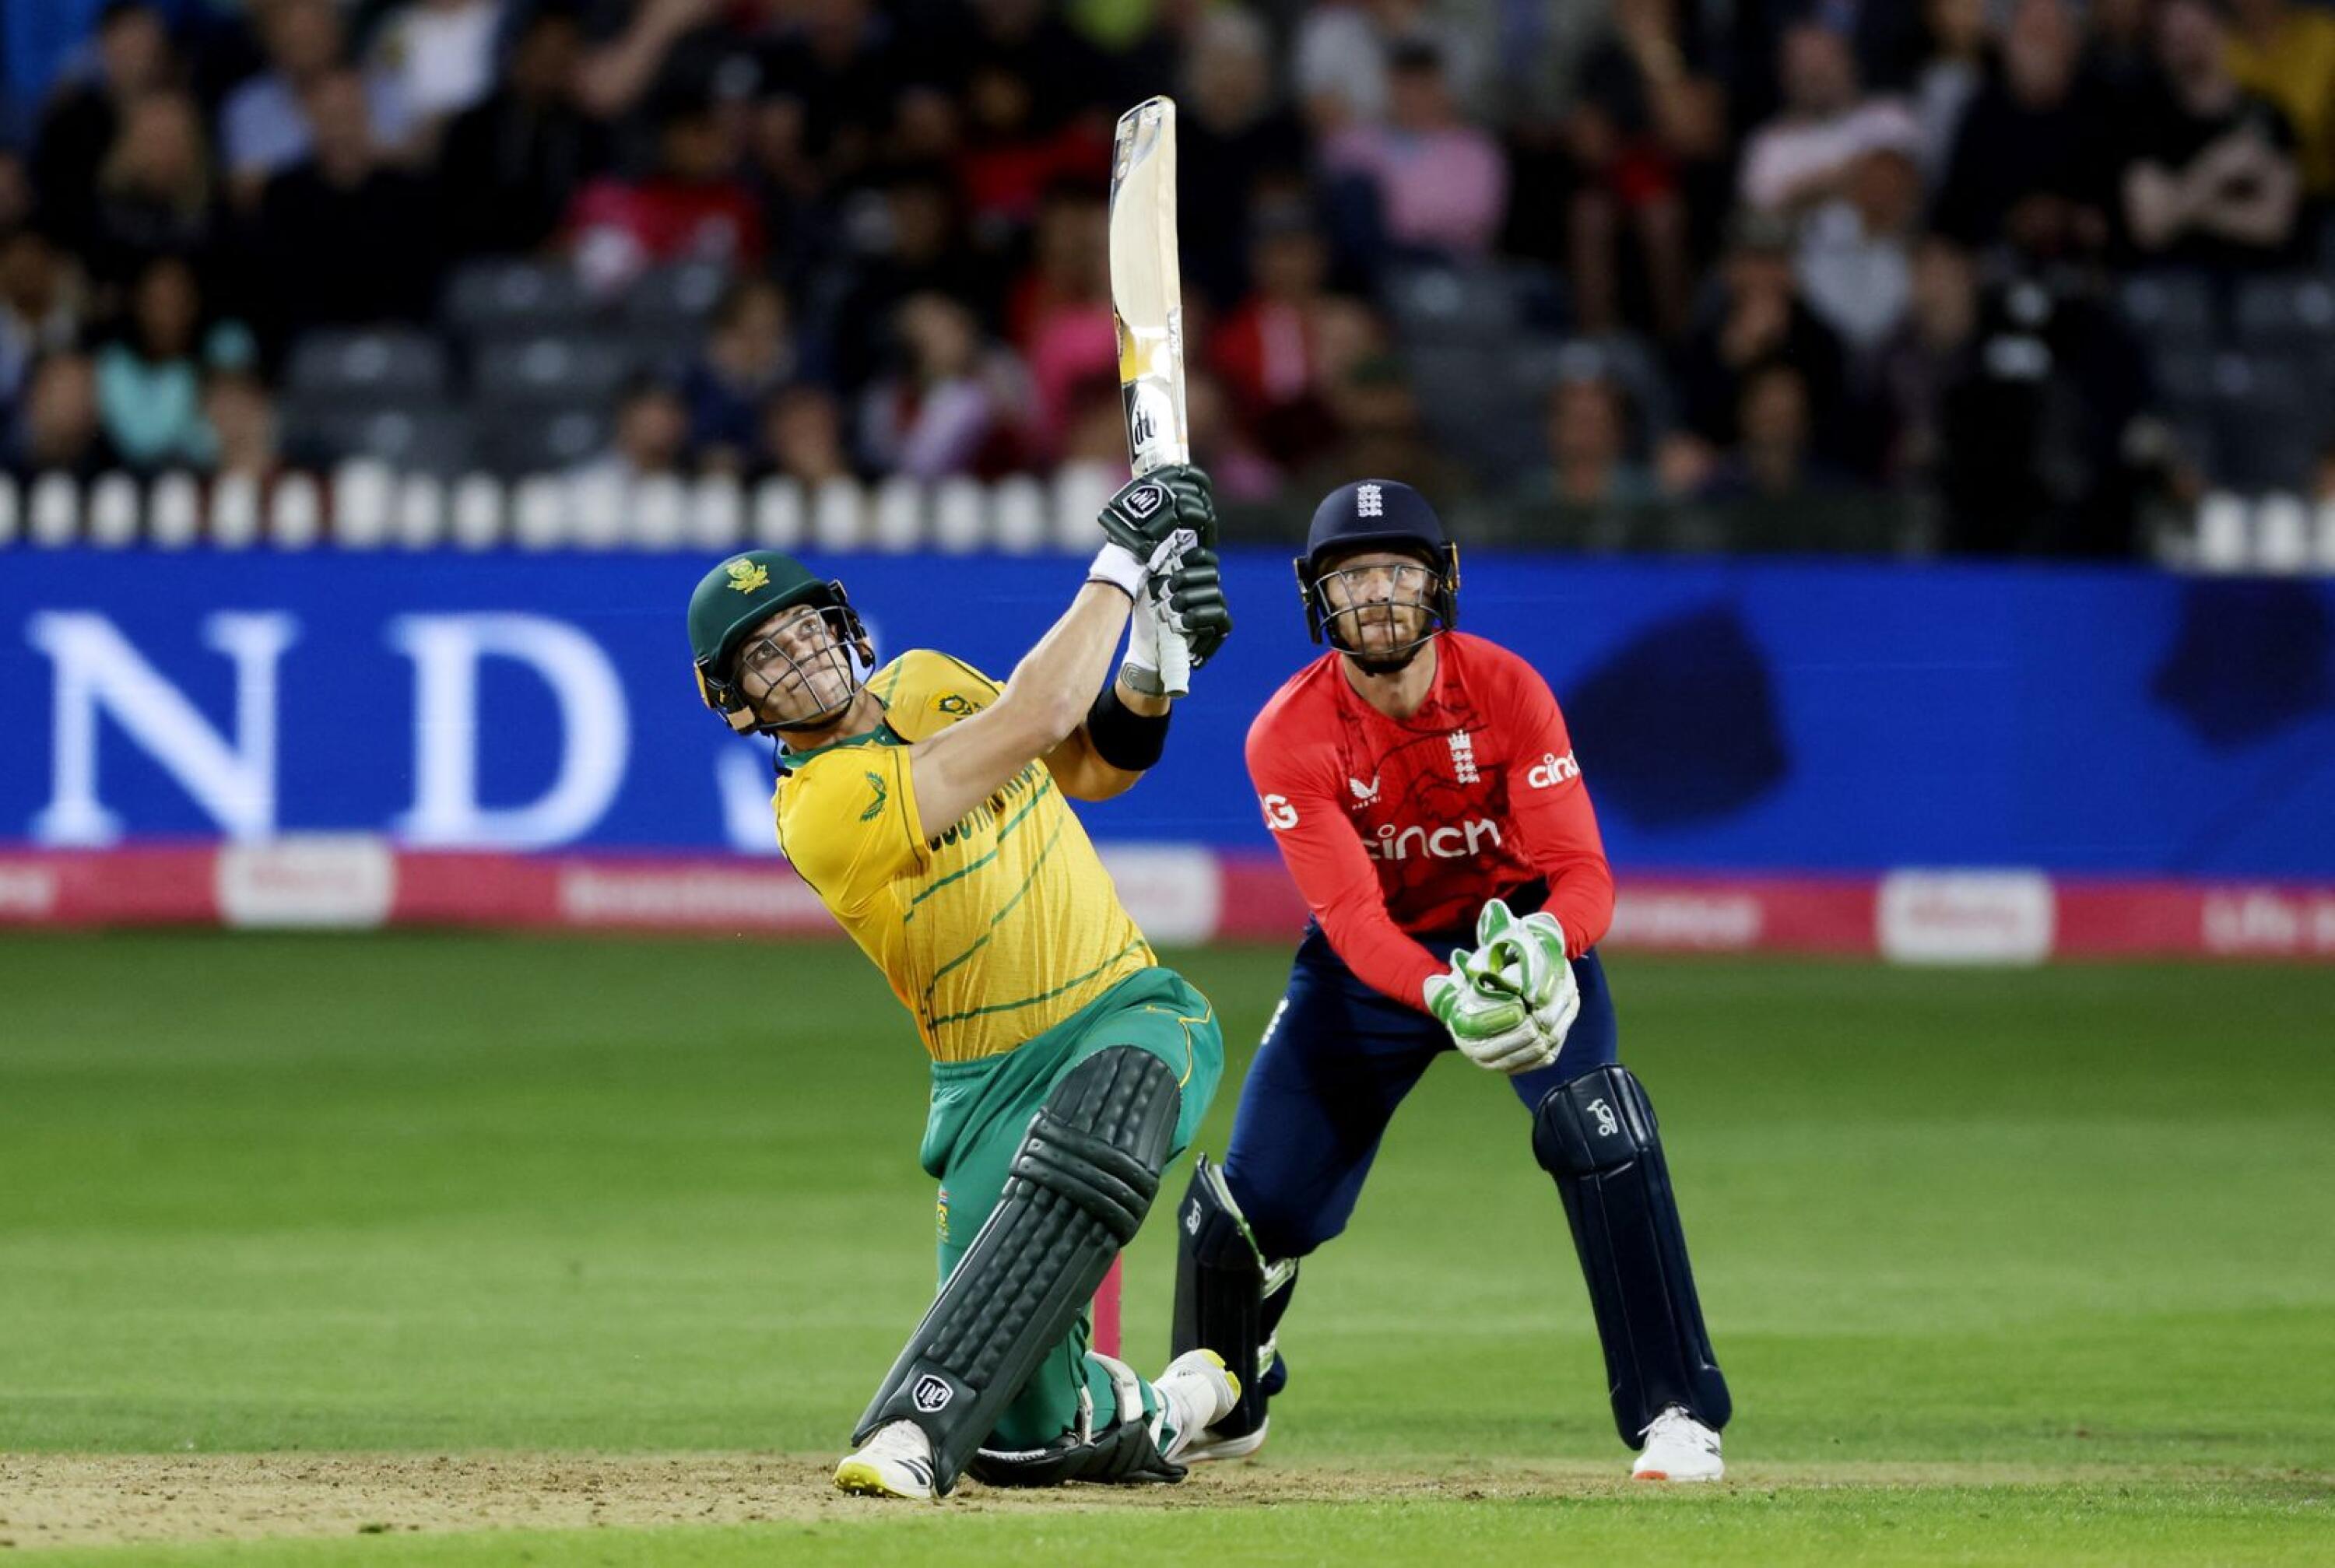 South Africa's Tristan Stubbs in action during the first T20 International against England at the Seat Unique Stadium in Briston on Wednesday